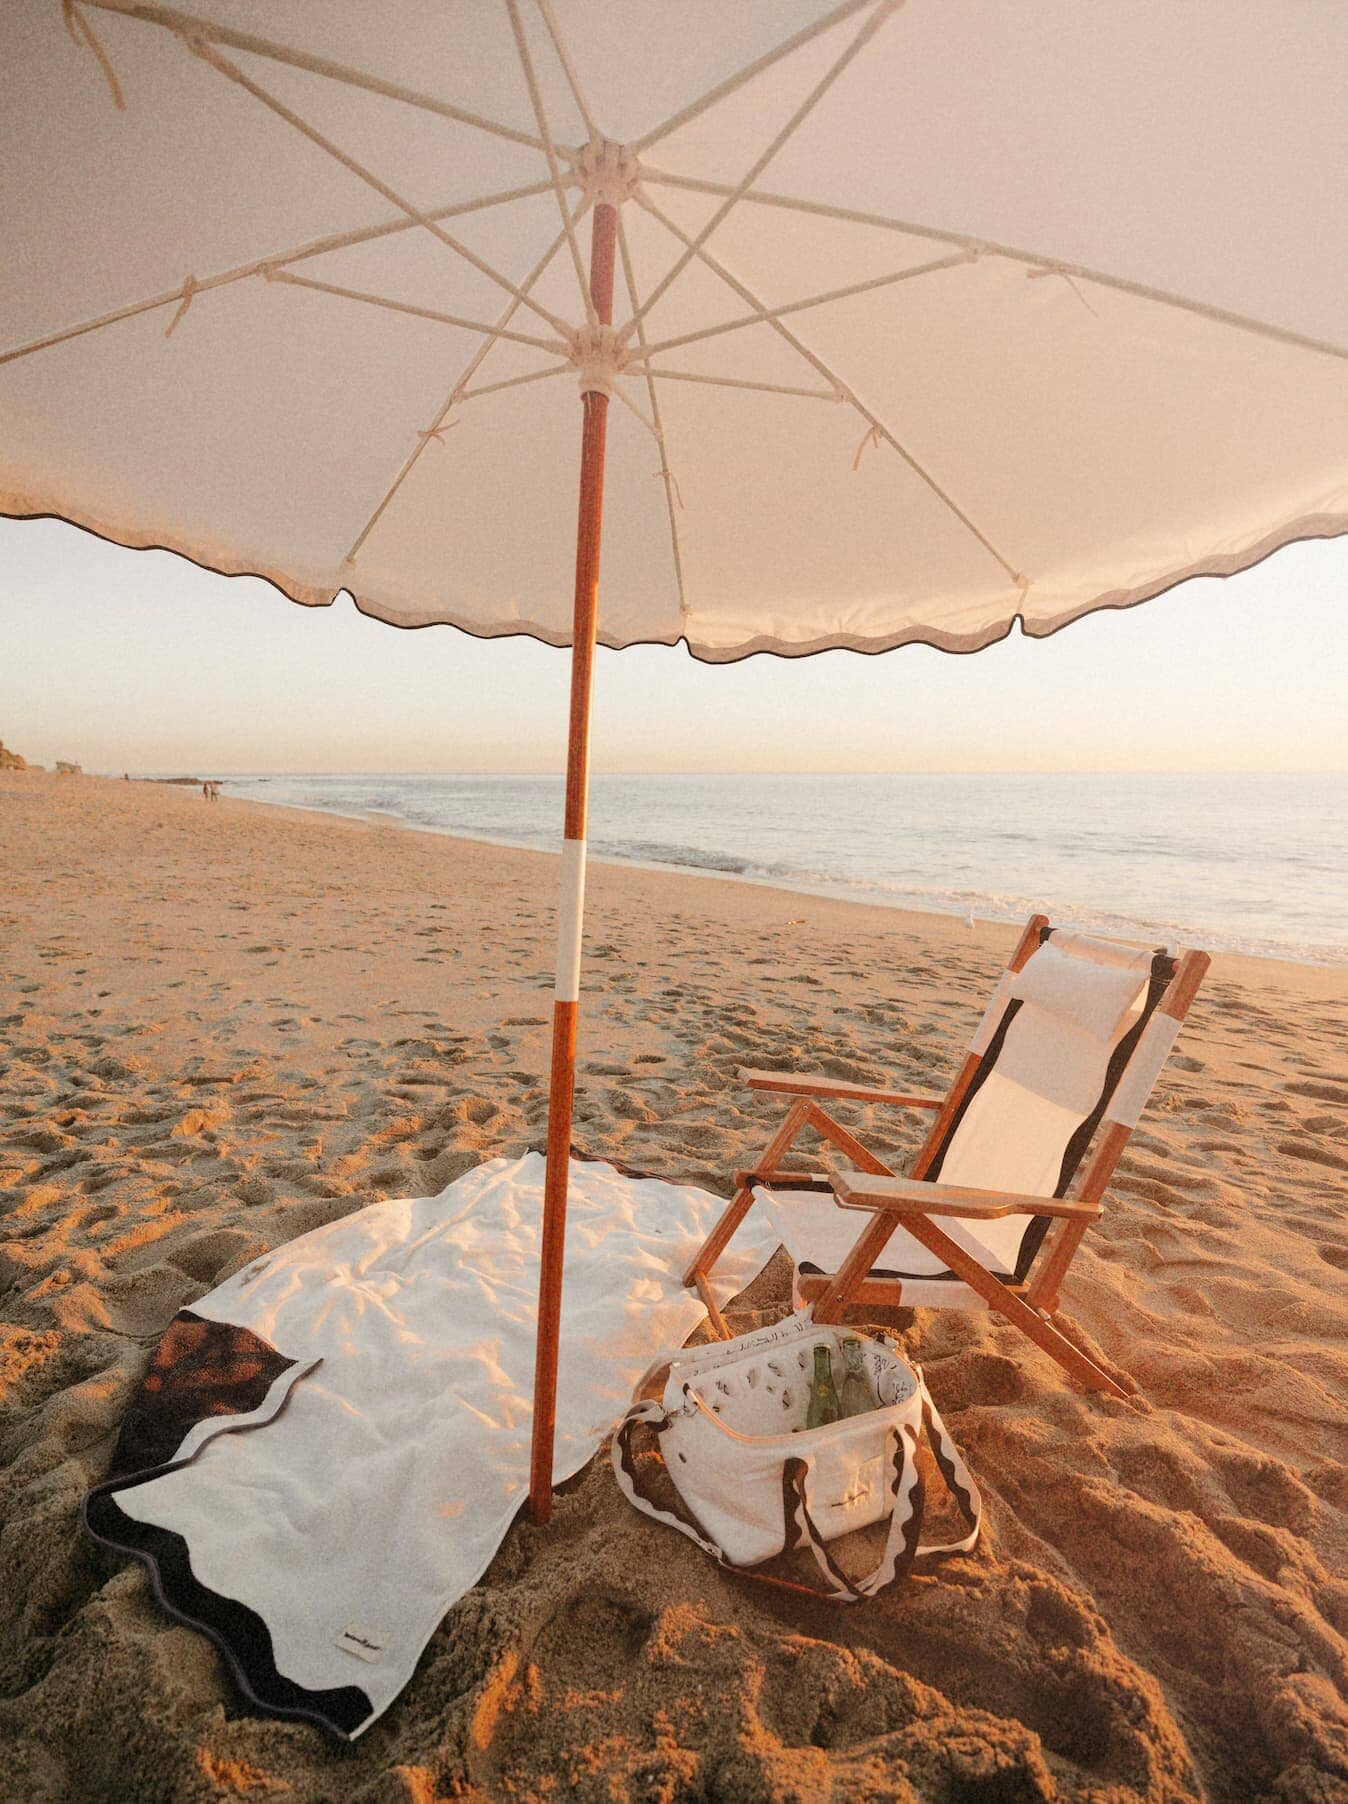 Riviera white beach set up with amalfi umbrella, chair and accessories